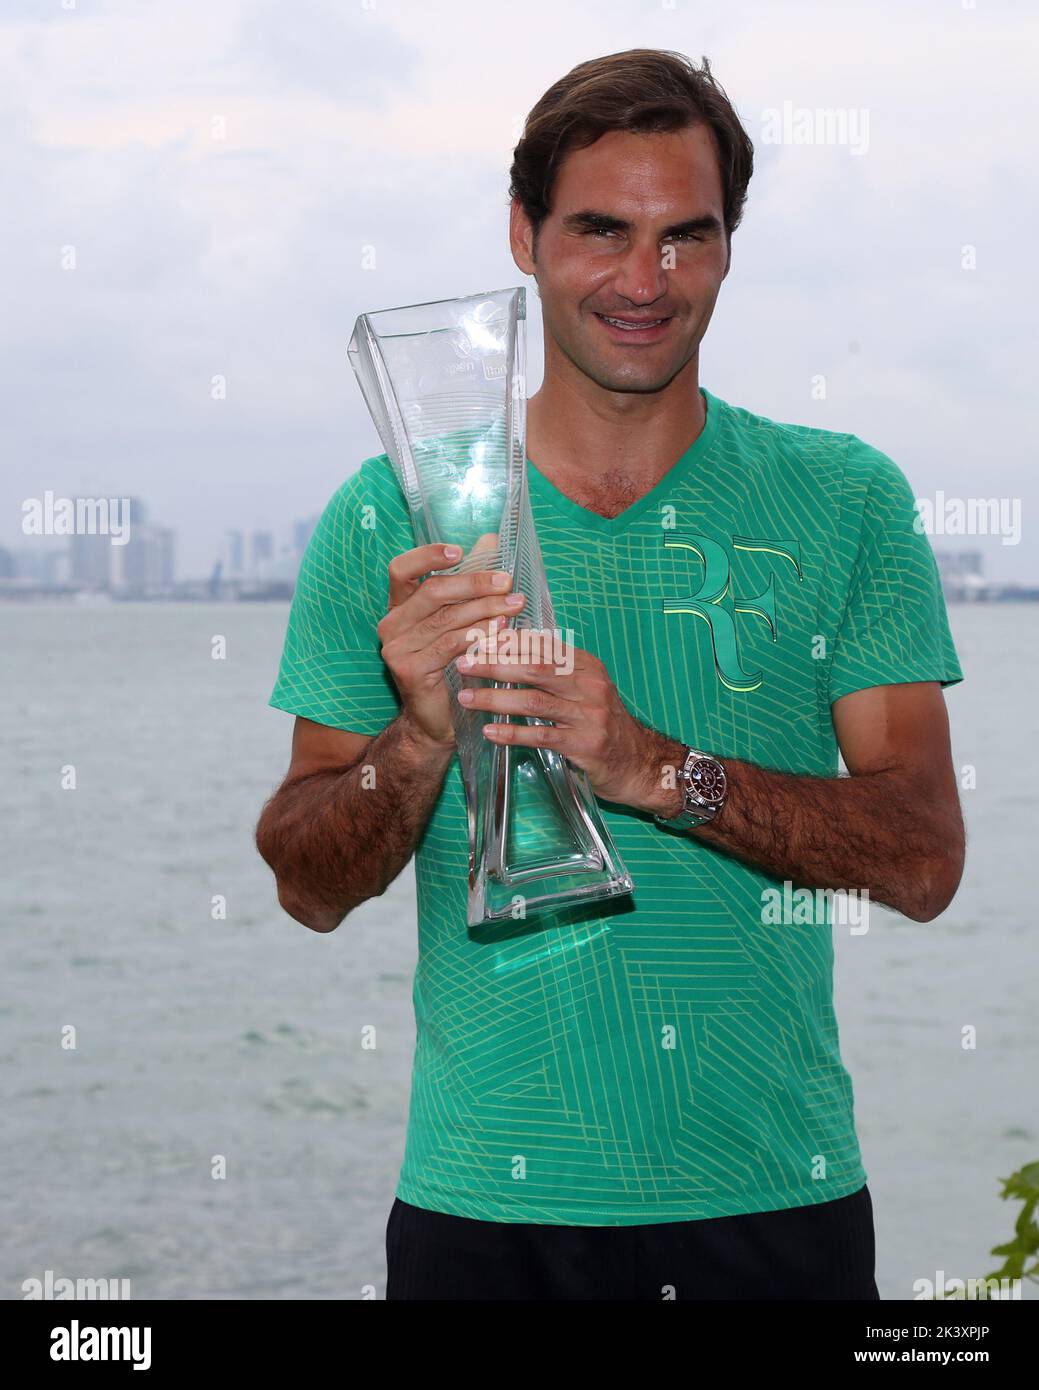 KEY BISCAYNE, FL - APRIL 02: Roger Federer of Switzerland poses at the The Rusty Pelican Restaurant in front of the Miami Skyline after defeating Rafael Nadal of Spain during the Men's Final on day 14 of the Miami Open at Crandon Park Tennis Center on April 2, 2017 in Key Biscayne, Florida. People: Roger Federer Credit: Storms Media Group/Alamy Live News Stock Photo